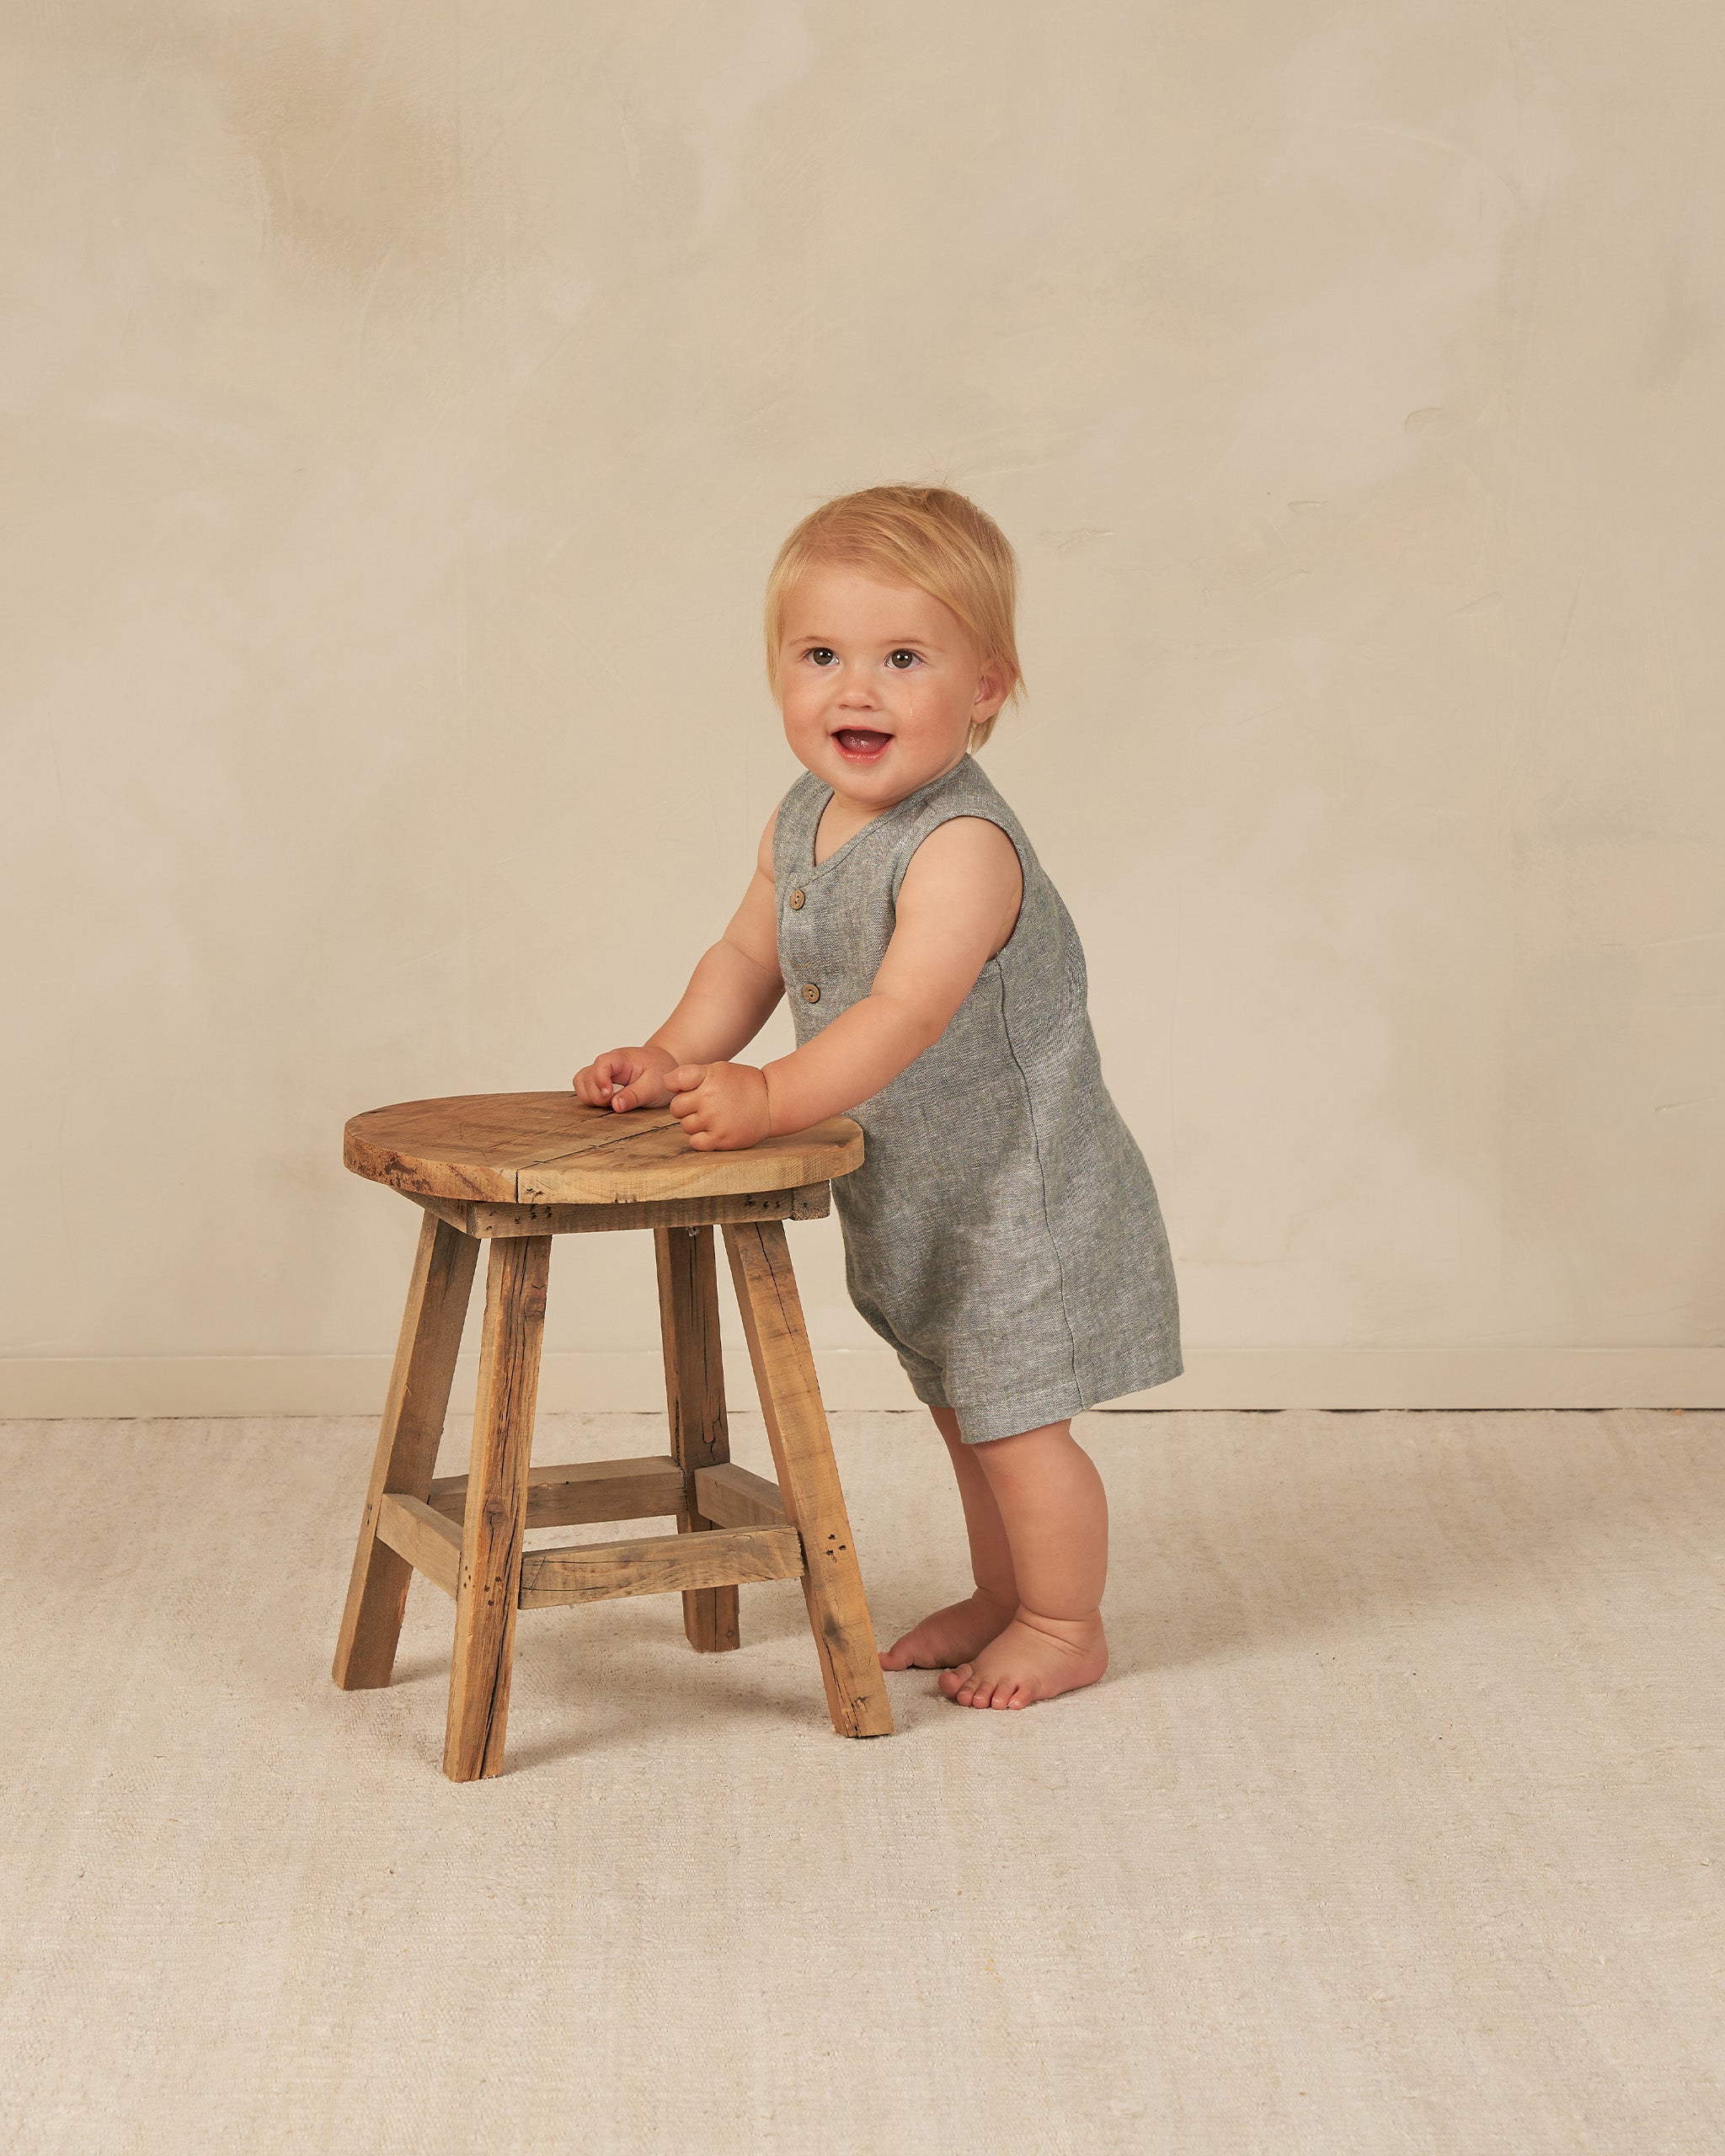 Maverick Romper || Heathered Indigo - Rylee + Cru | Kids Clothes | Trendy Baby Clothes | Modern Infant Outfits |